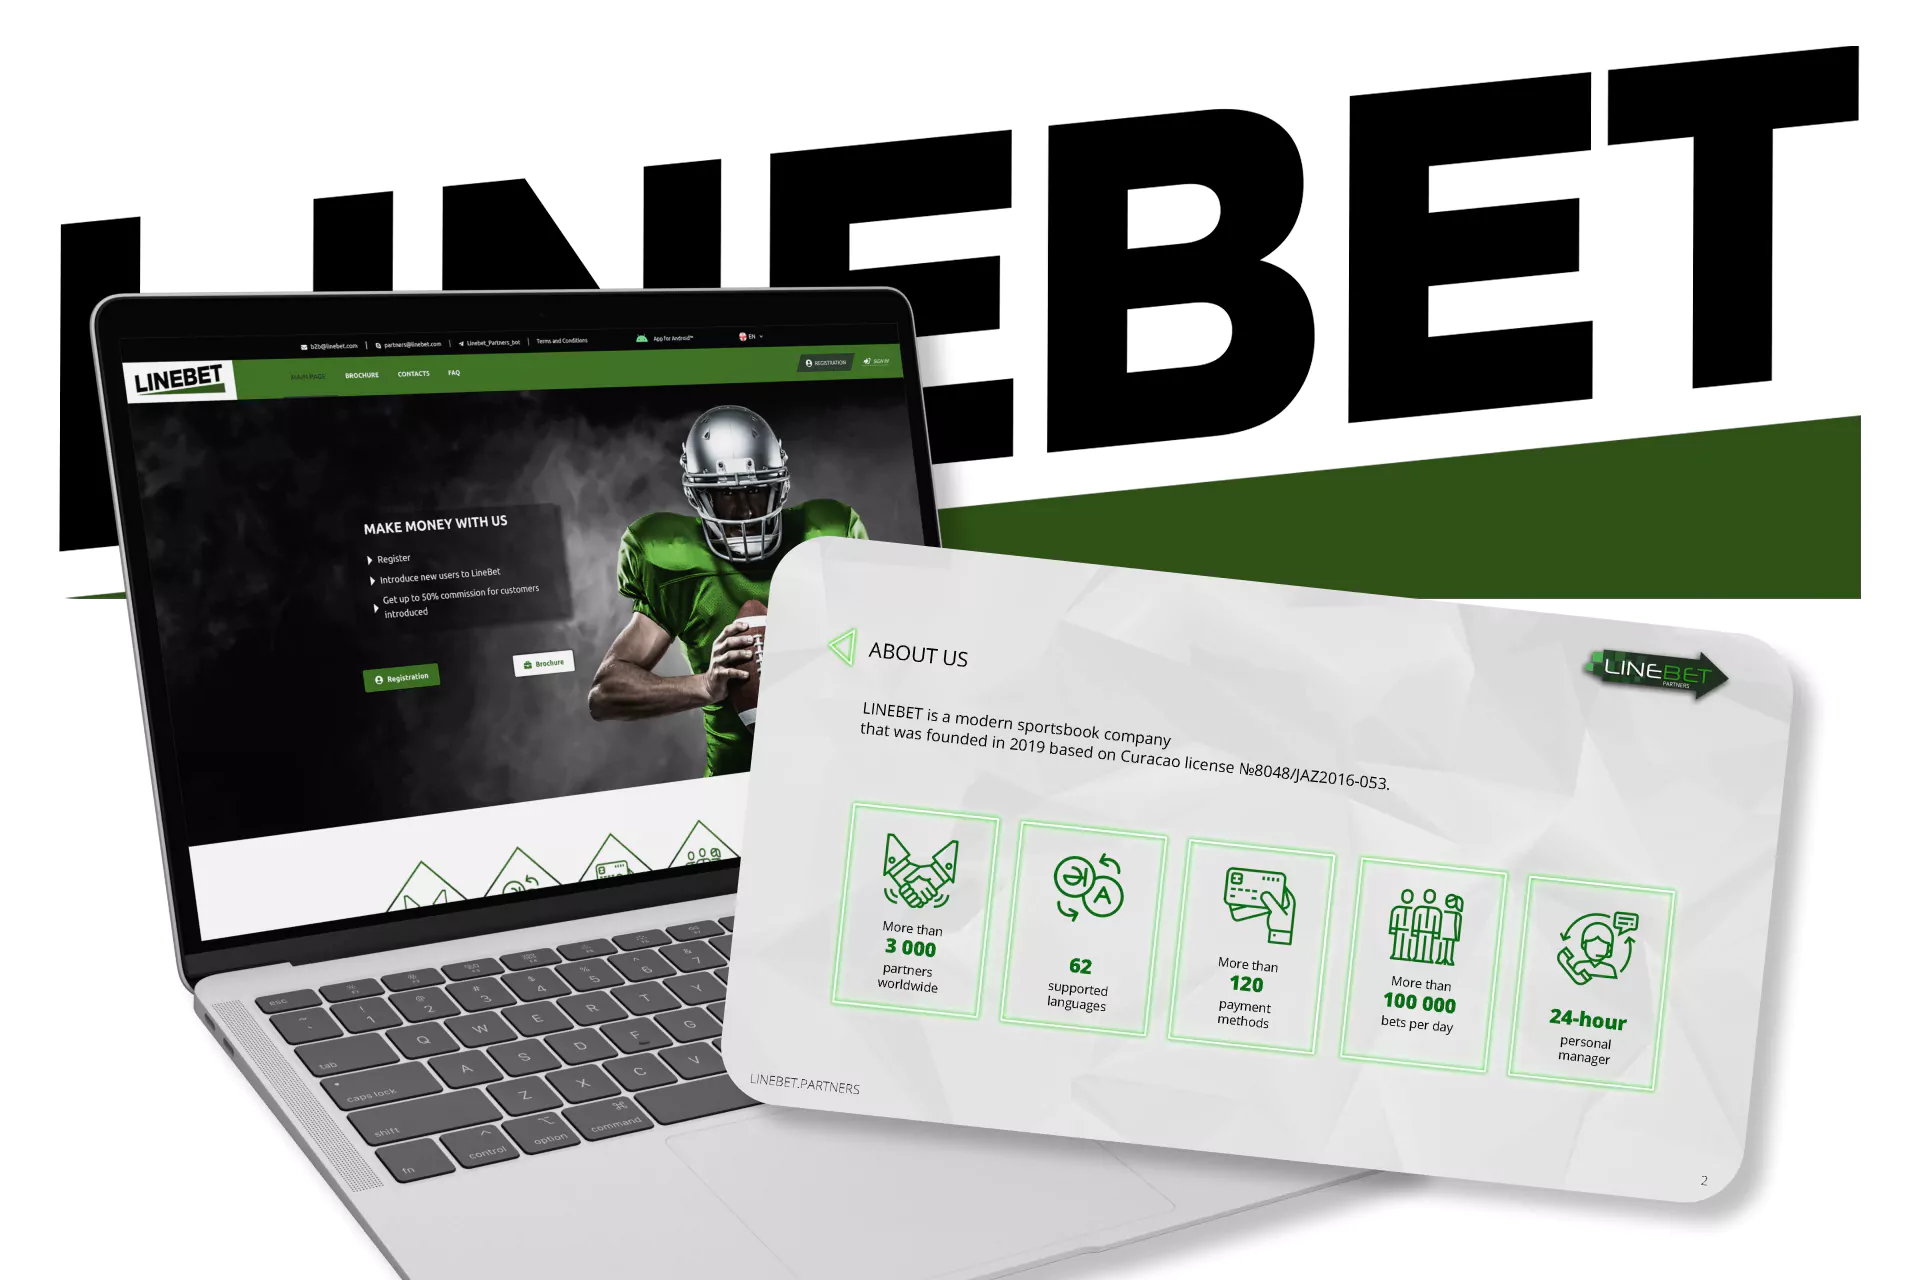 Learn more about the Linebet affiliate program, cooperation will be beneficial.